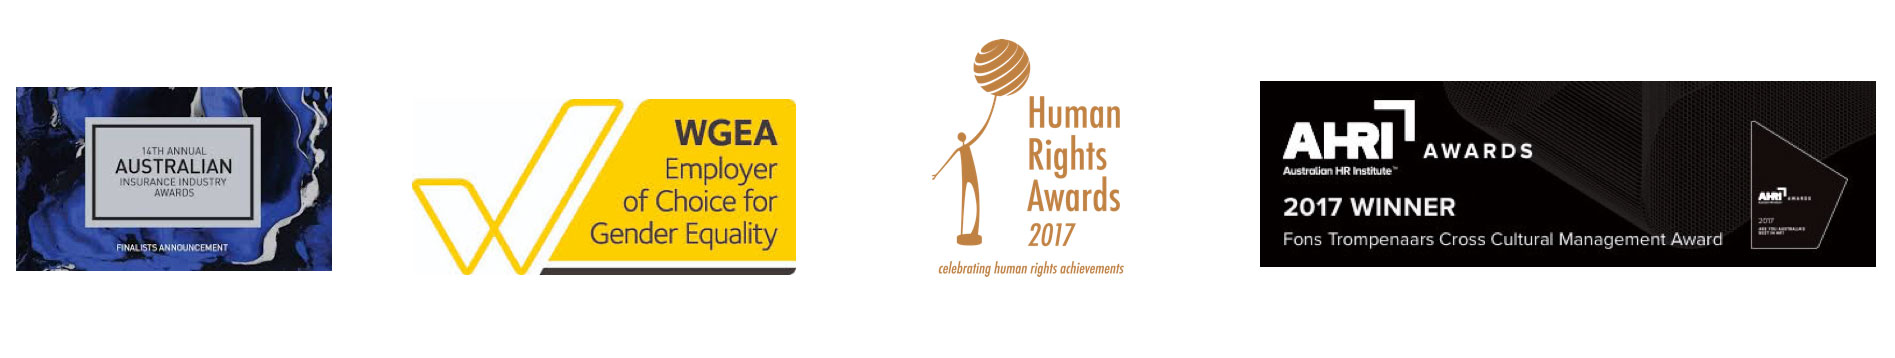 14th Annual Australia Insurance Industry Award Finalist, WGEA Employer of Choice of Gender Equality, Human Rights Awards 2017, AHRI Awards 2017 Winner